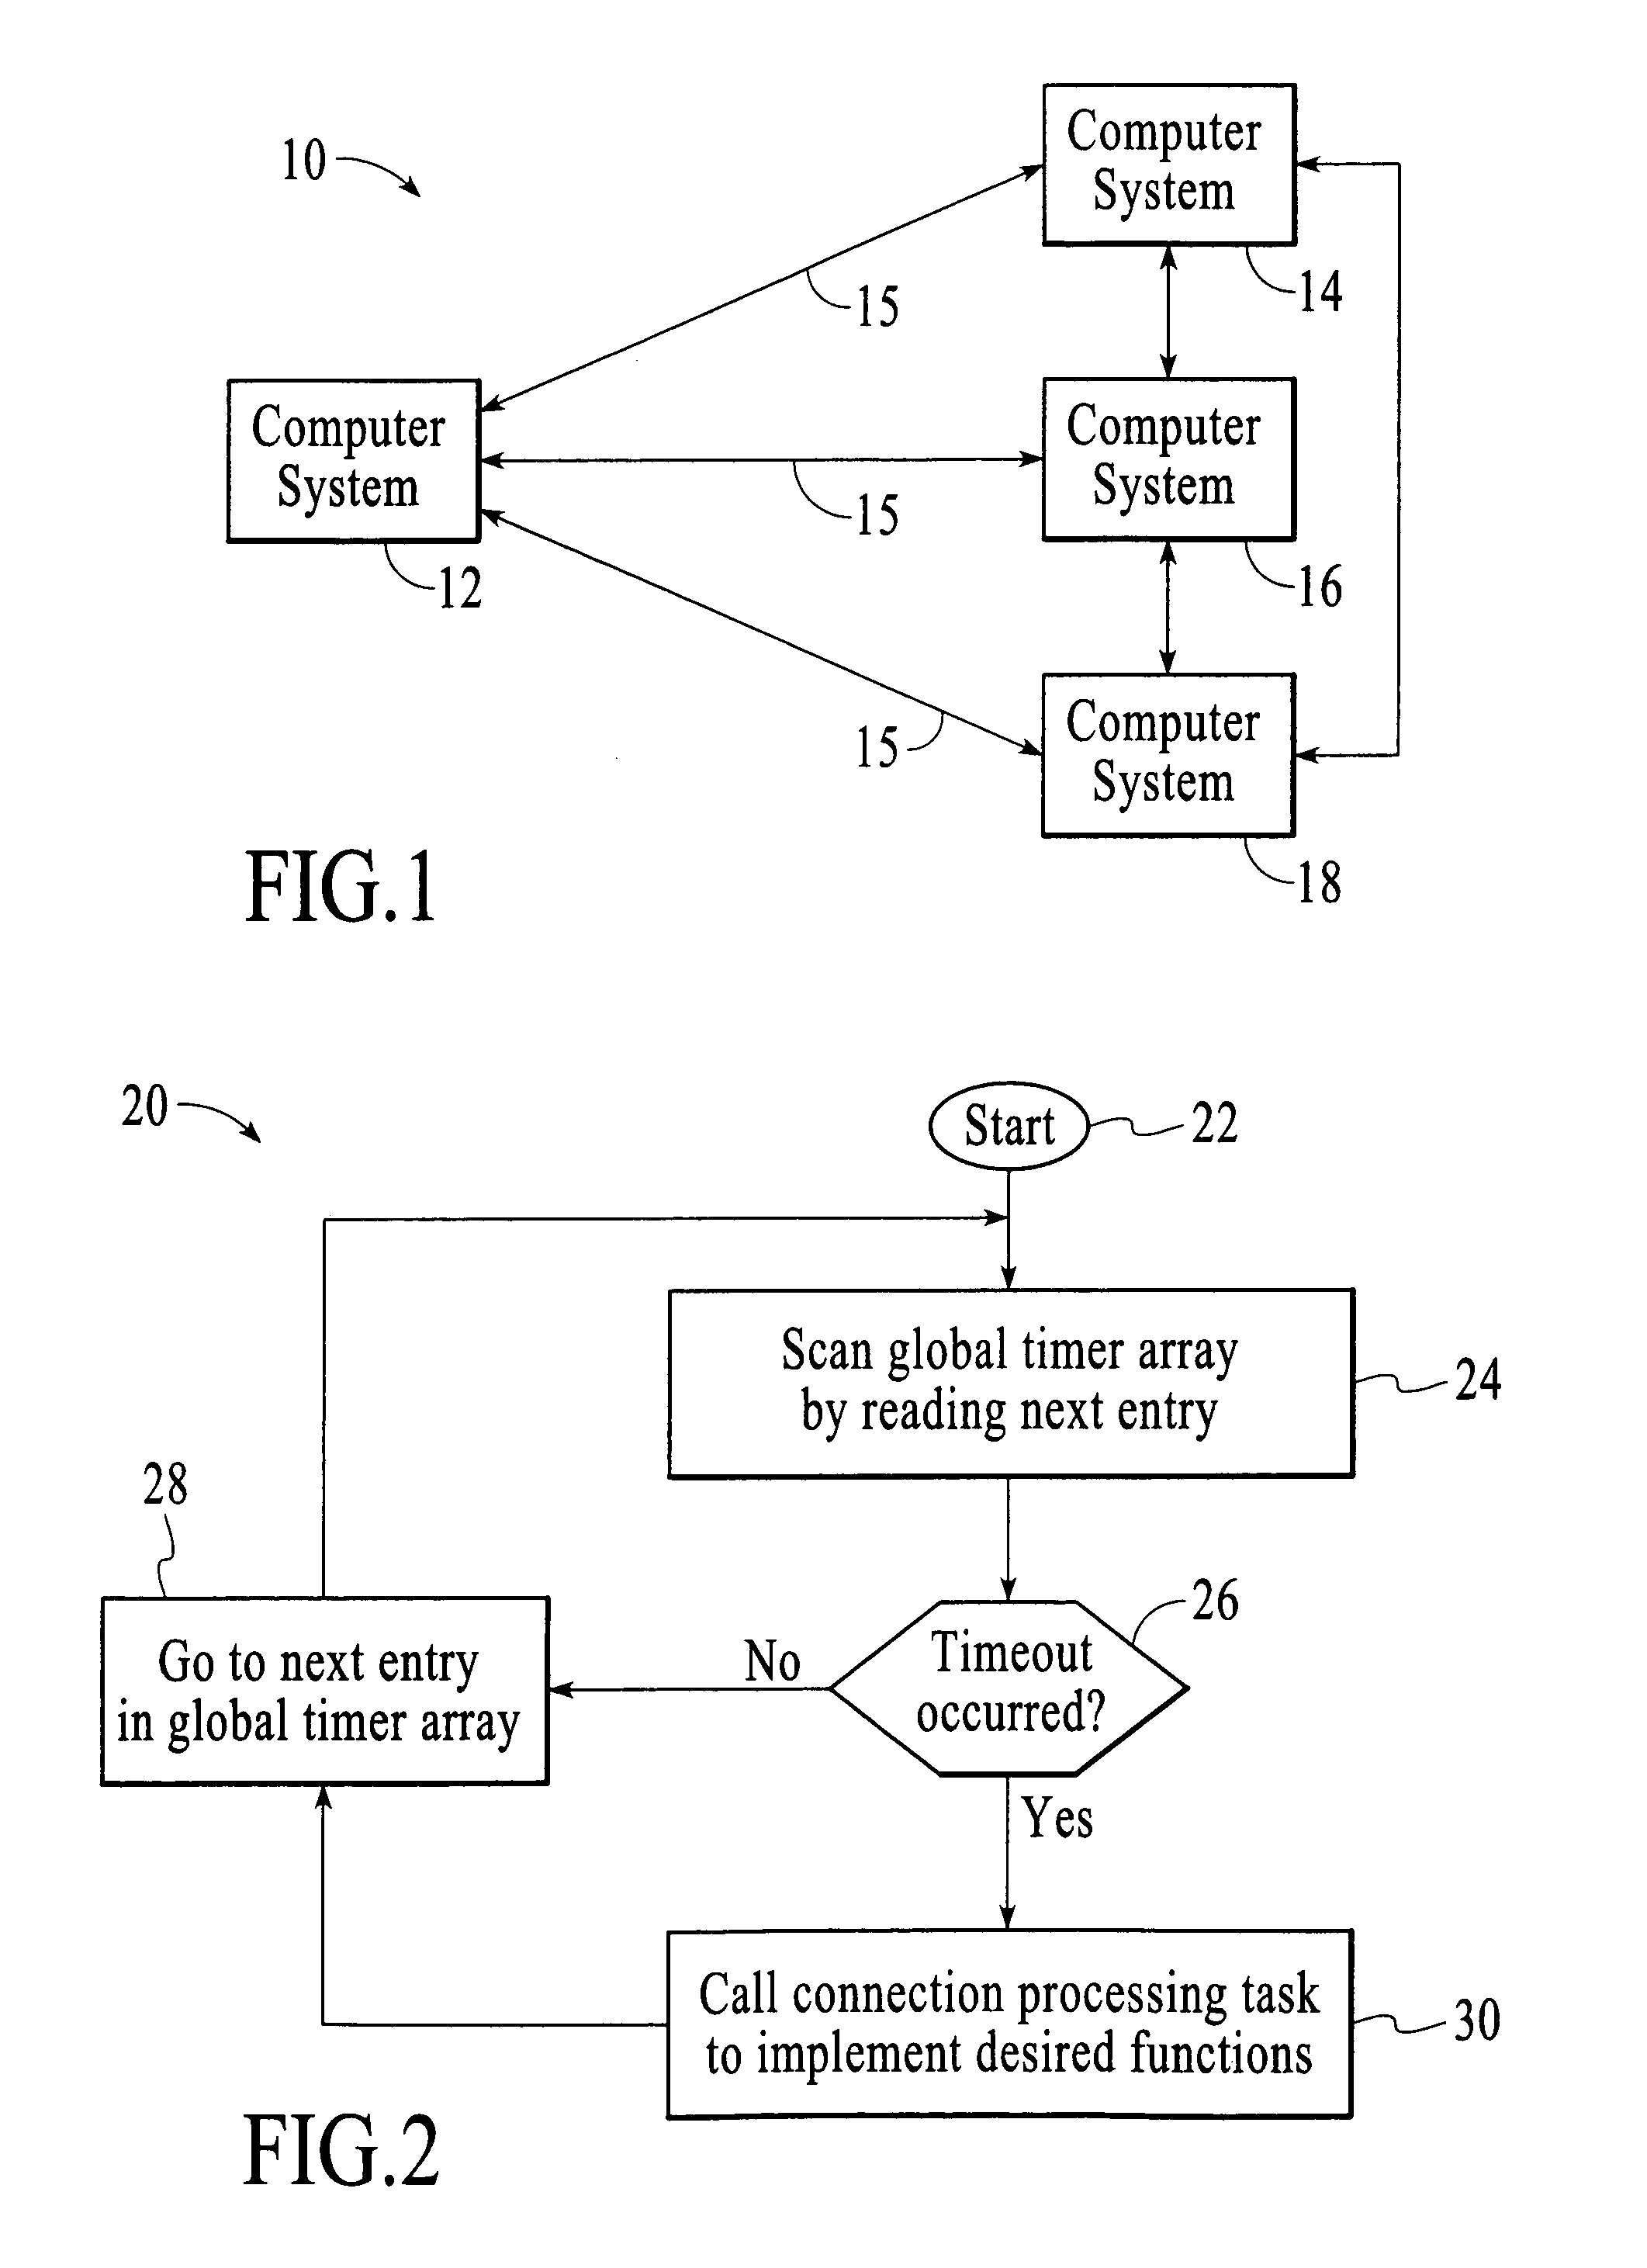 Method and system for maintaining and examining timers for network connections